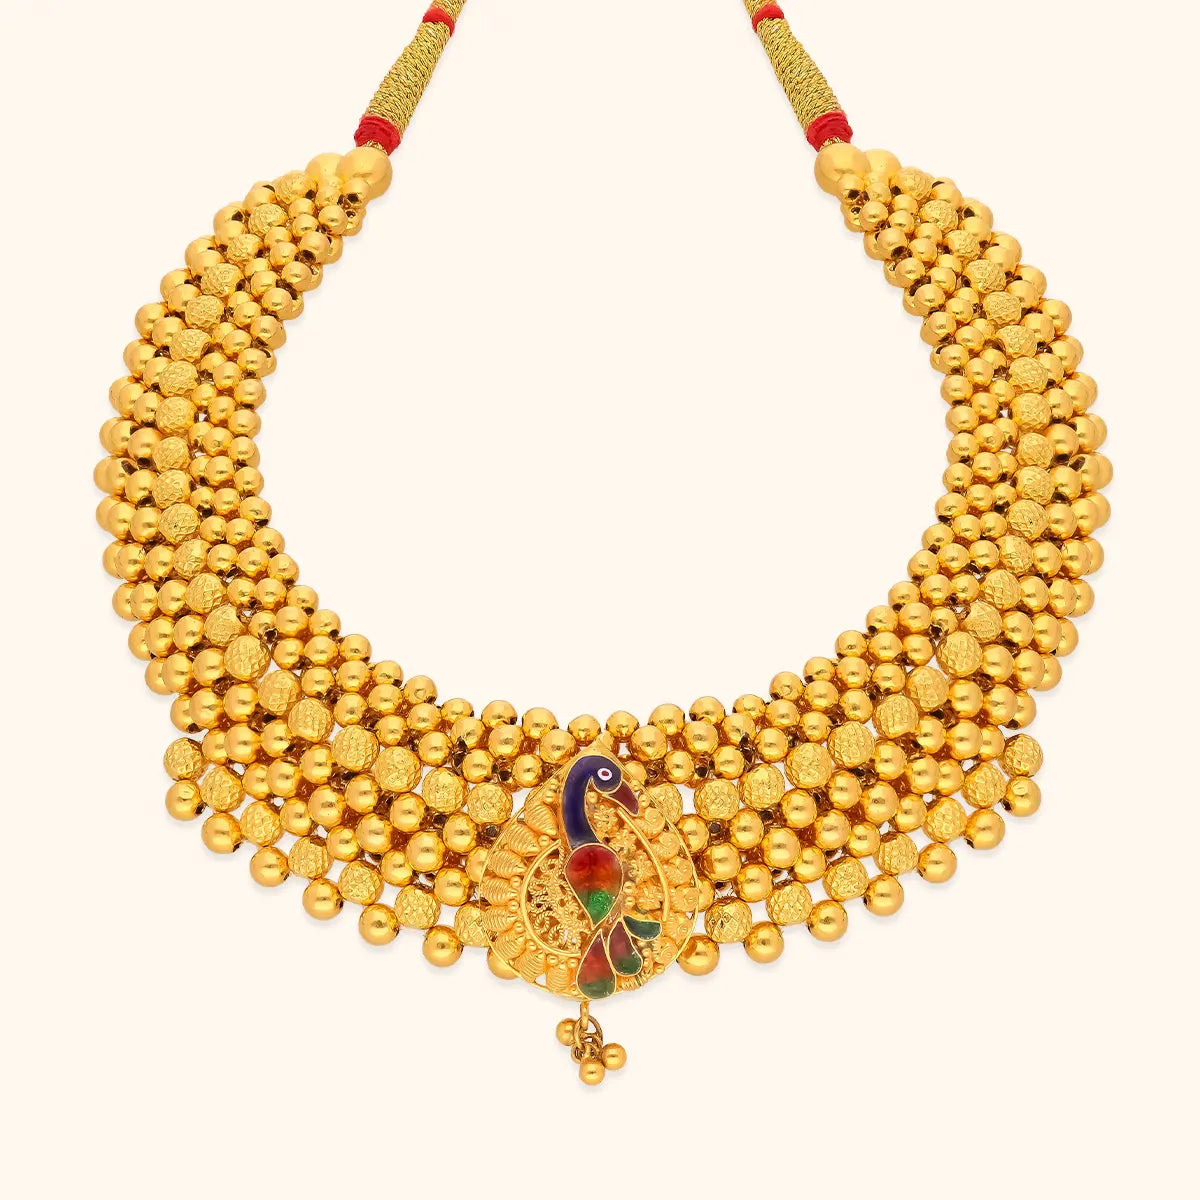 Shop Long Kolhapuri Necklace with Handmade Taas Peacock Pendant and  Matching Earrings  Adjustable Length